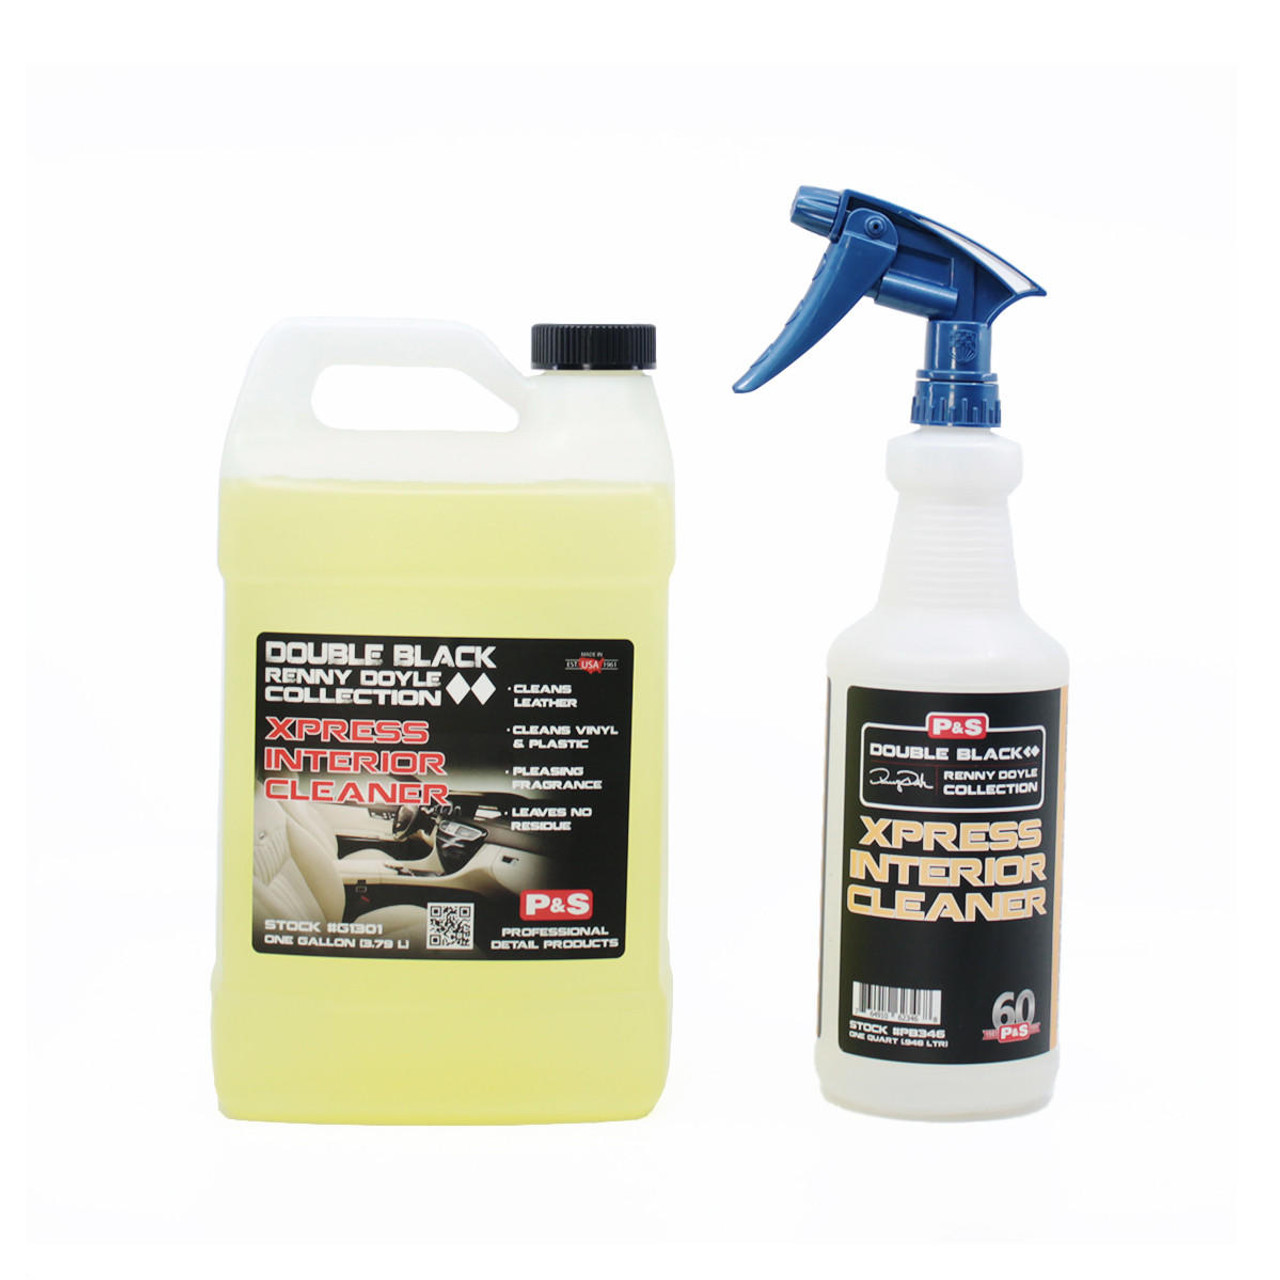 P&S Xpress Interior Cleaner Gallon And Bottle Combo